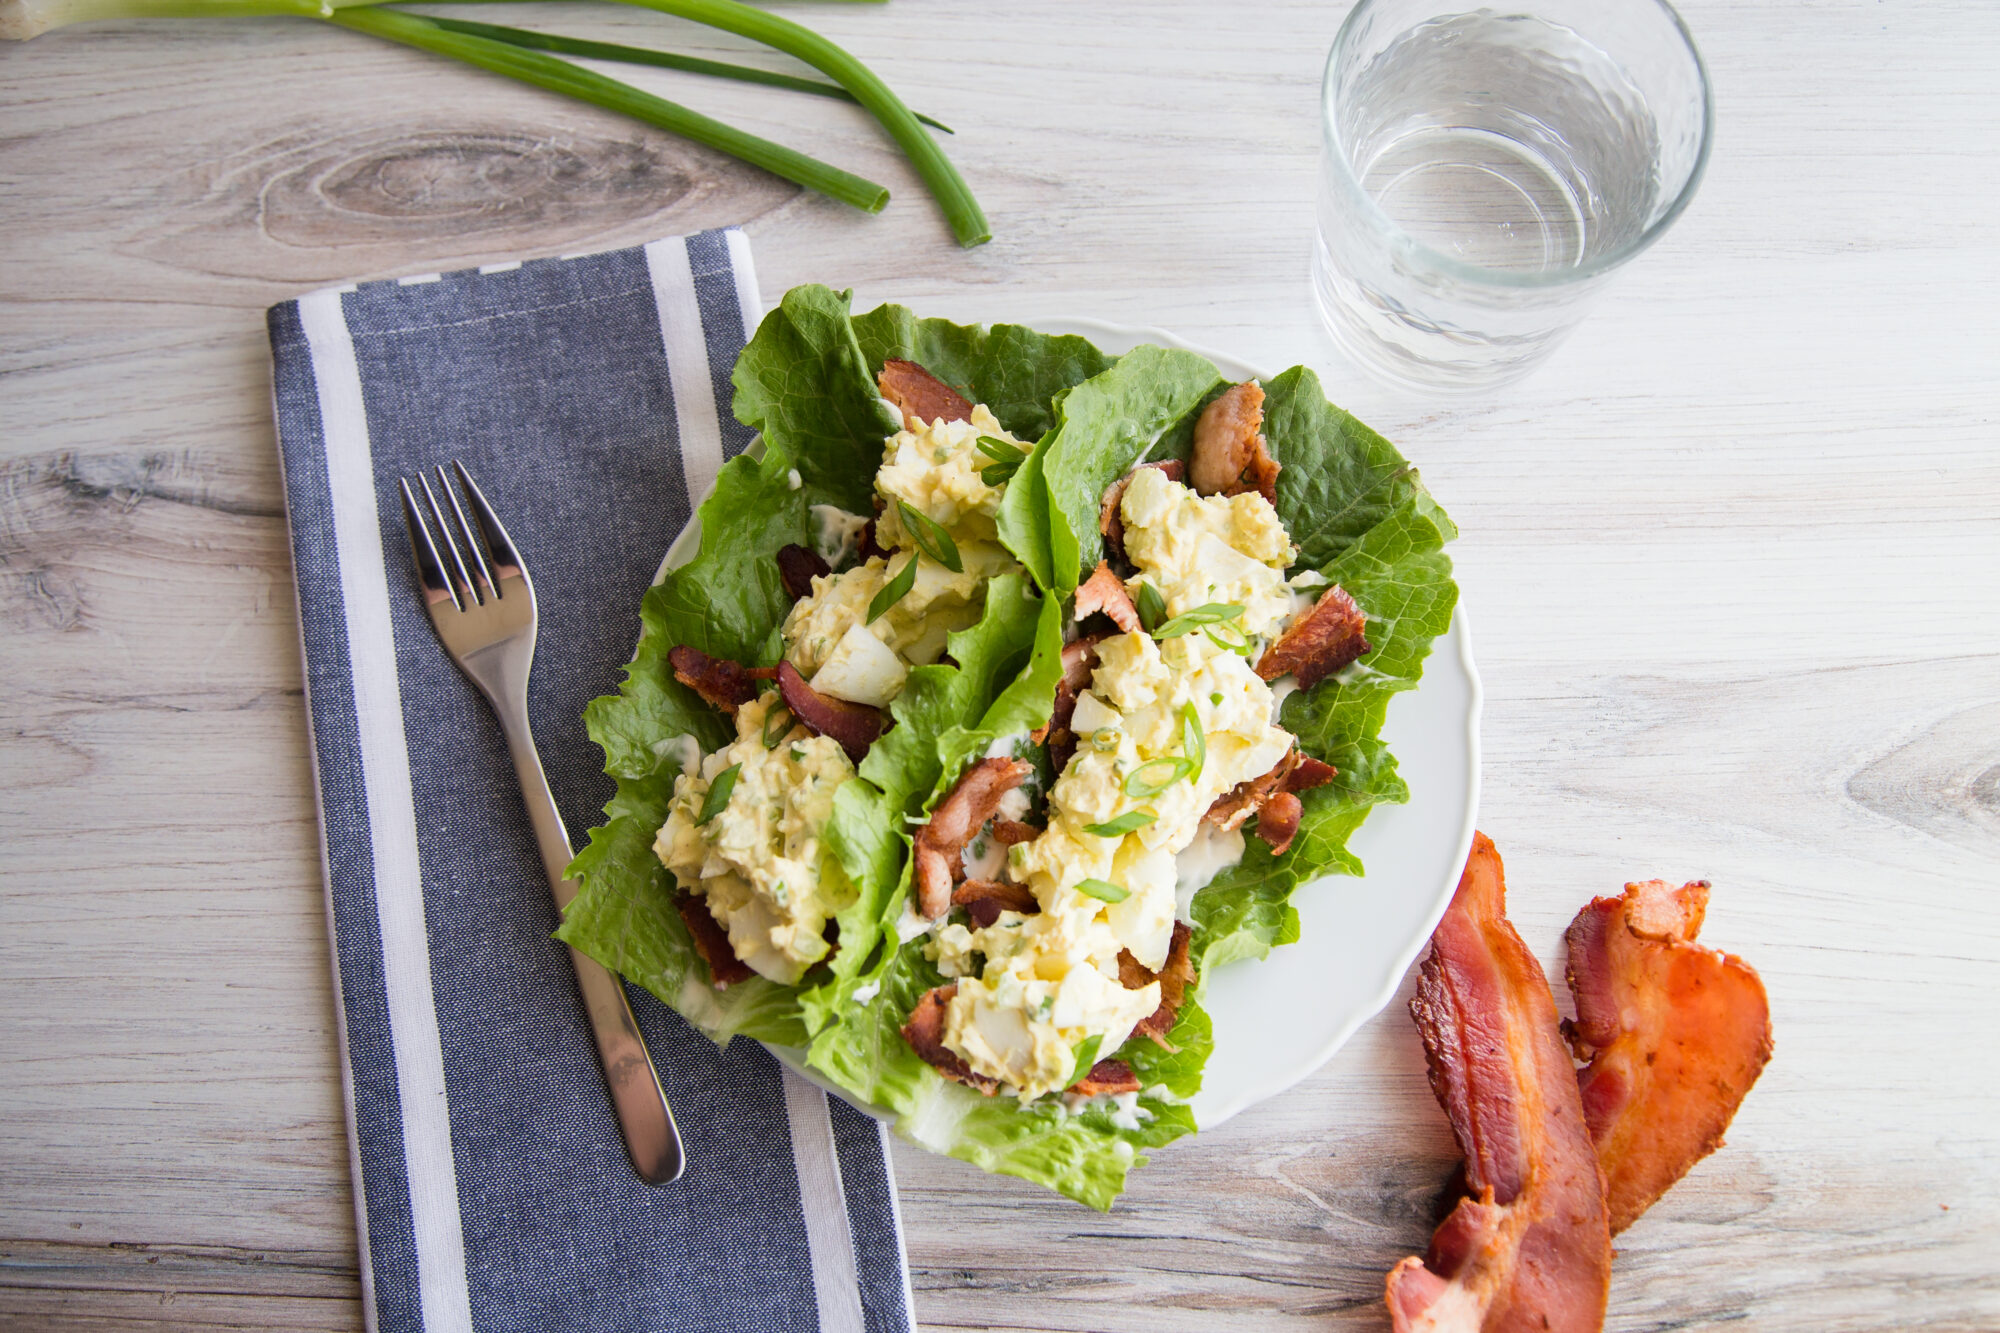 Top view of egg salad on top of bacon slices, lying on two lettuce leaves. A towel, fork, and bacon strips to the side.